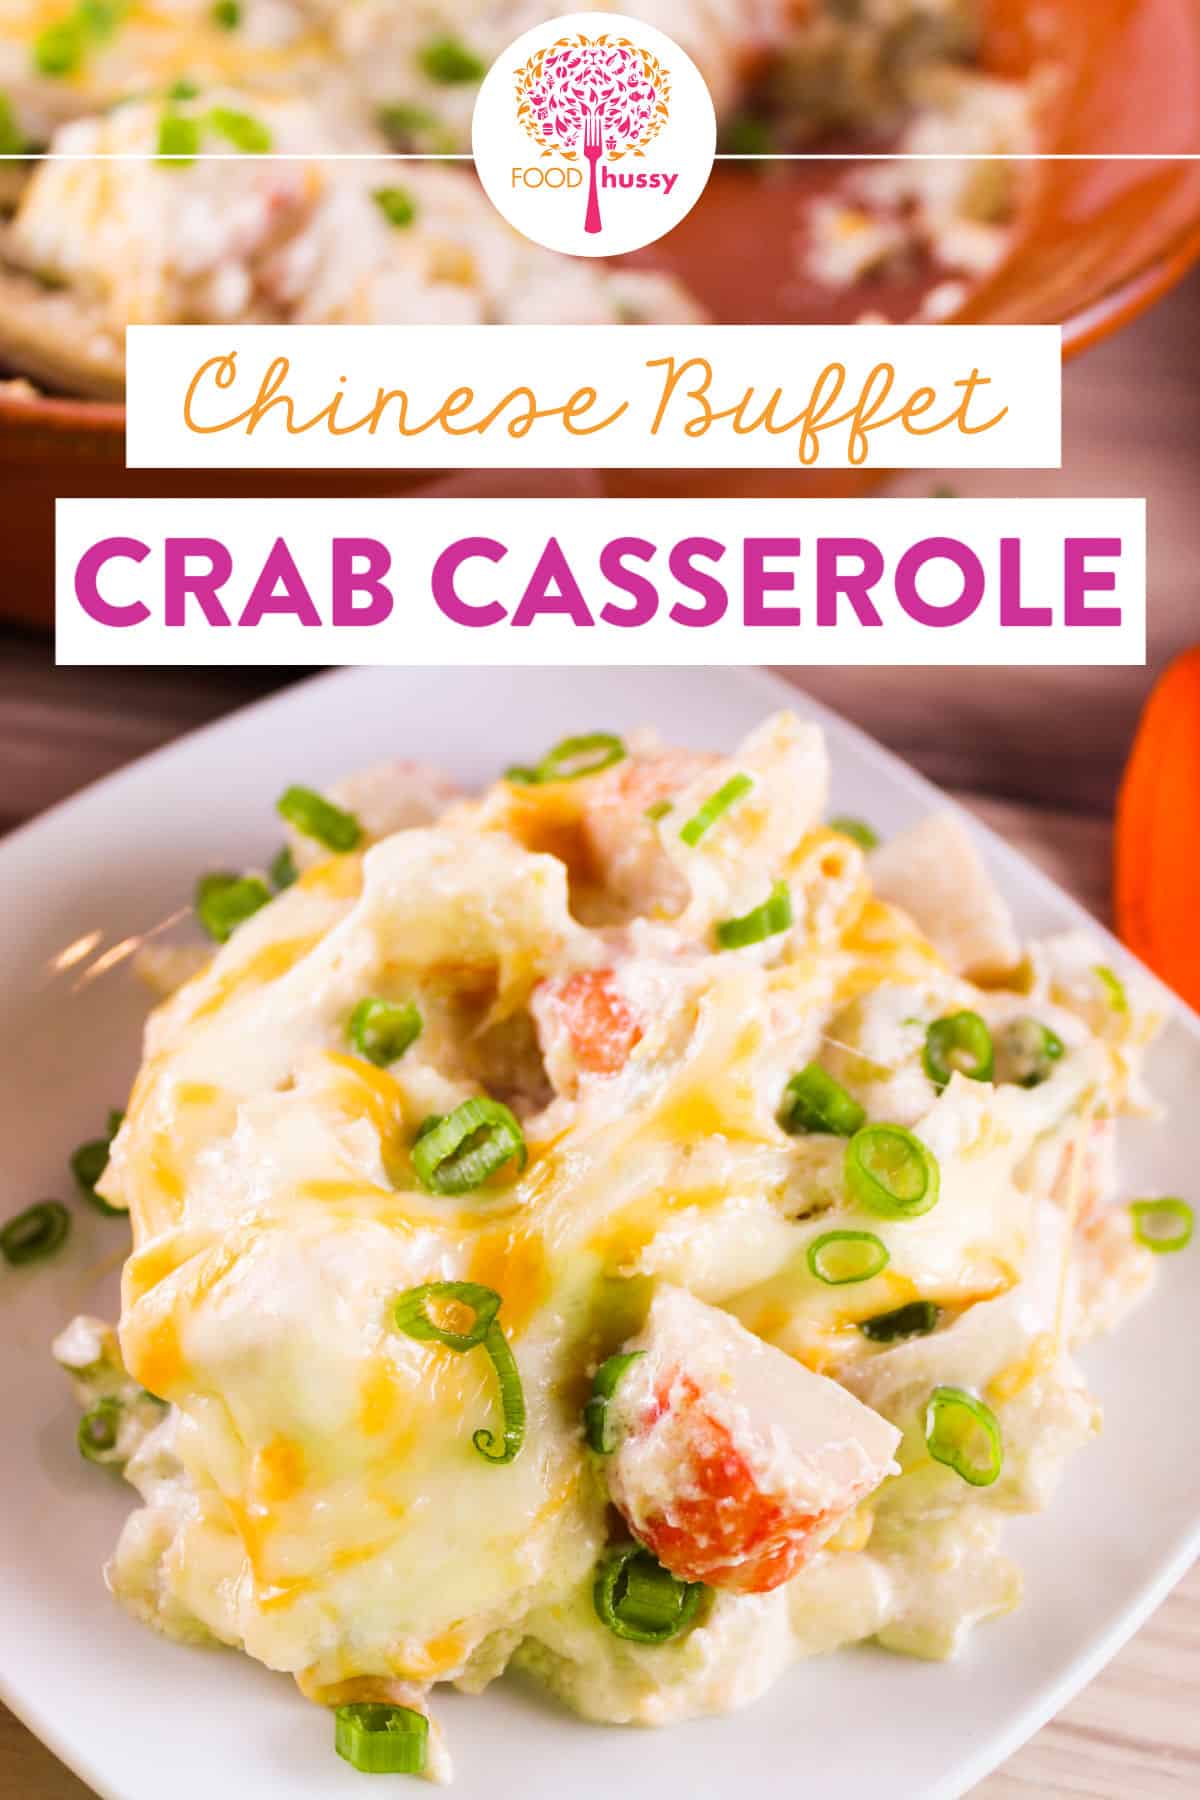 Chinese Buffet Crab Casserole is creamy, crunchy and cheesy! Crab Casserole is my favorite item on the buffet - along with the pink chicken on a stick - and the donuts!  via @foodhussy